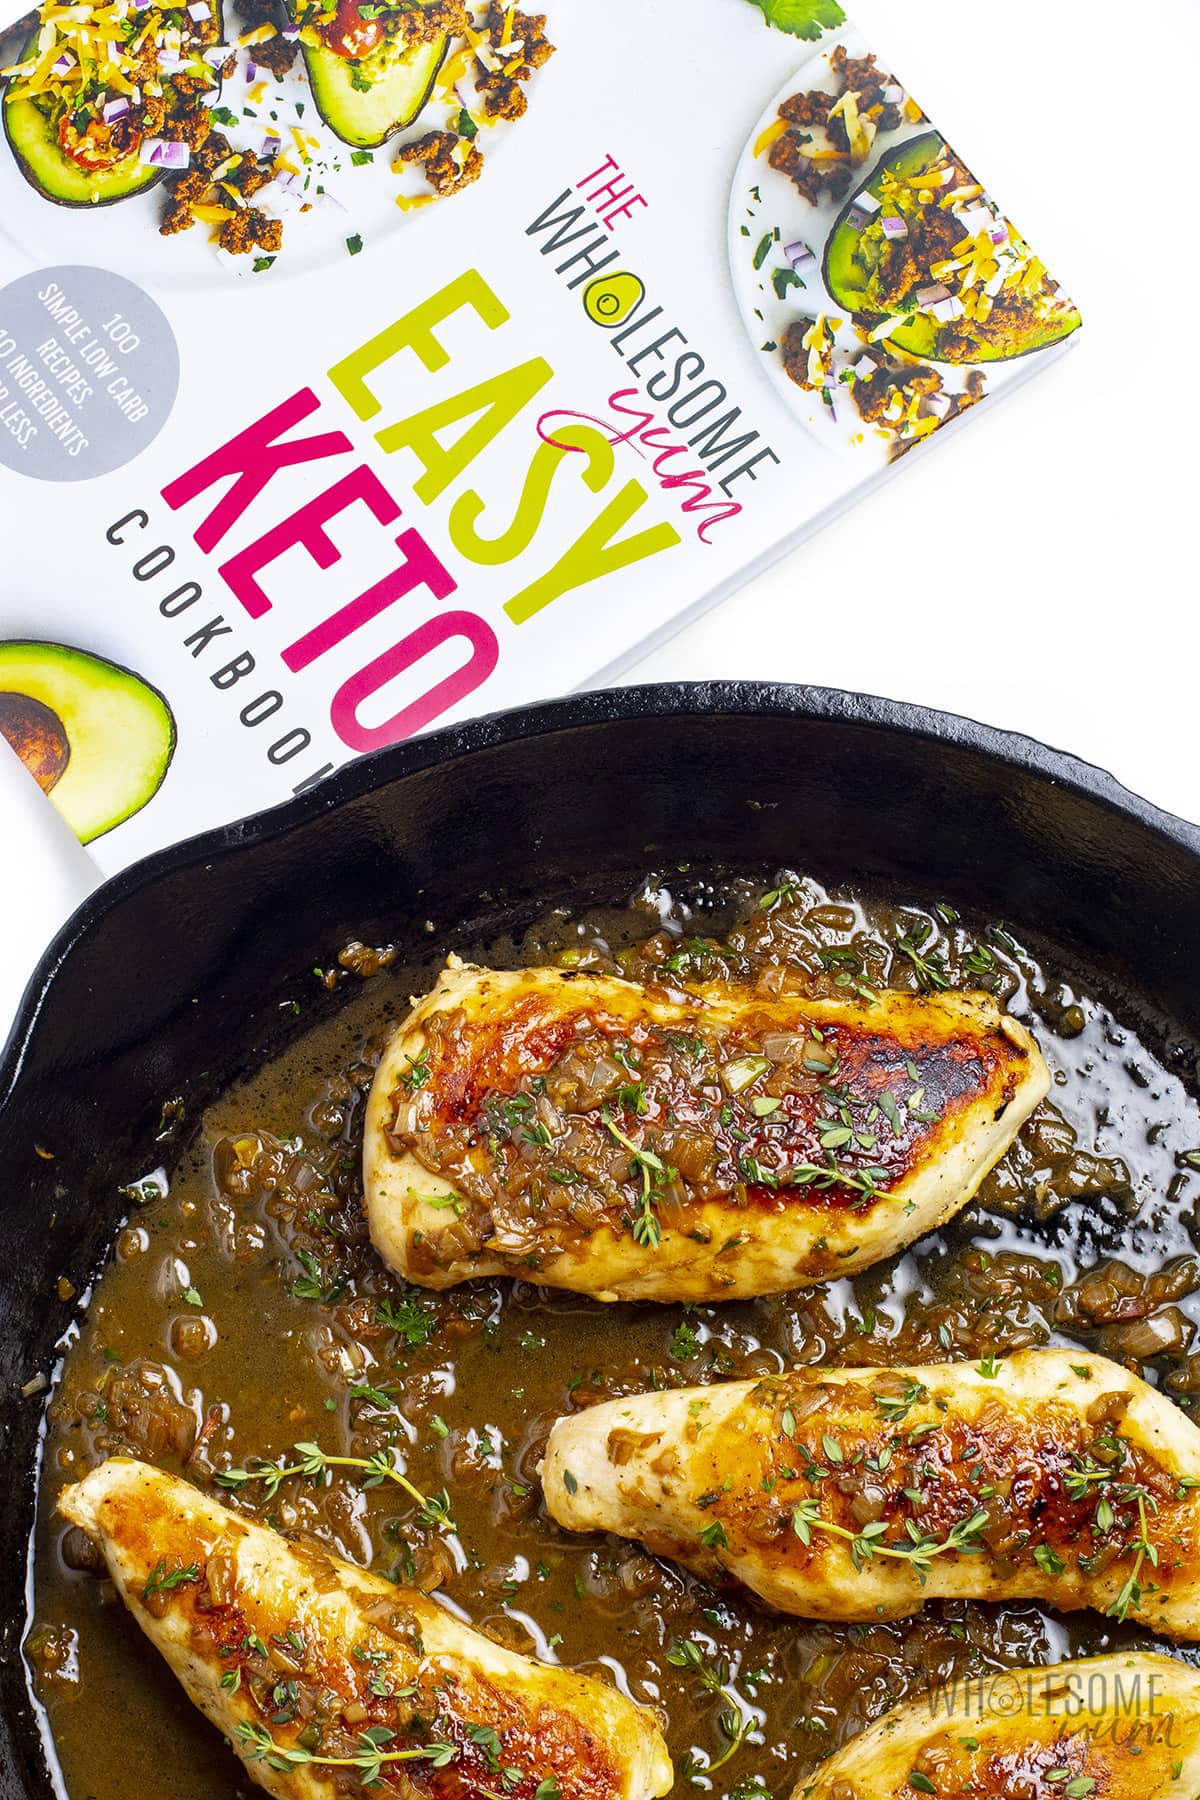 Sauteed chicken in a cast iron skillet next to Easy Keto Cookbook.